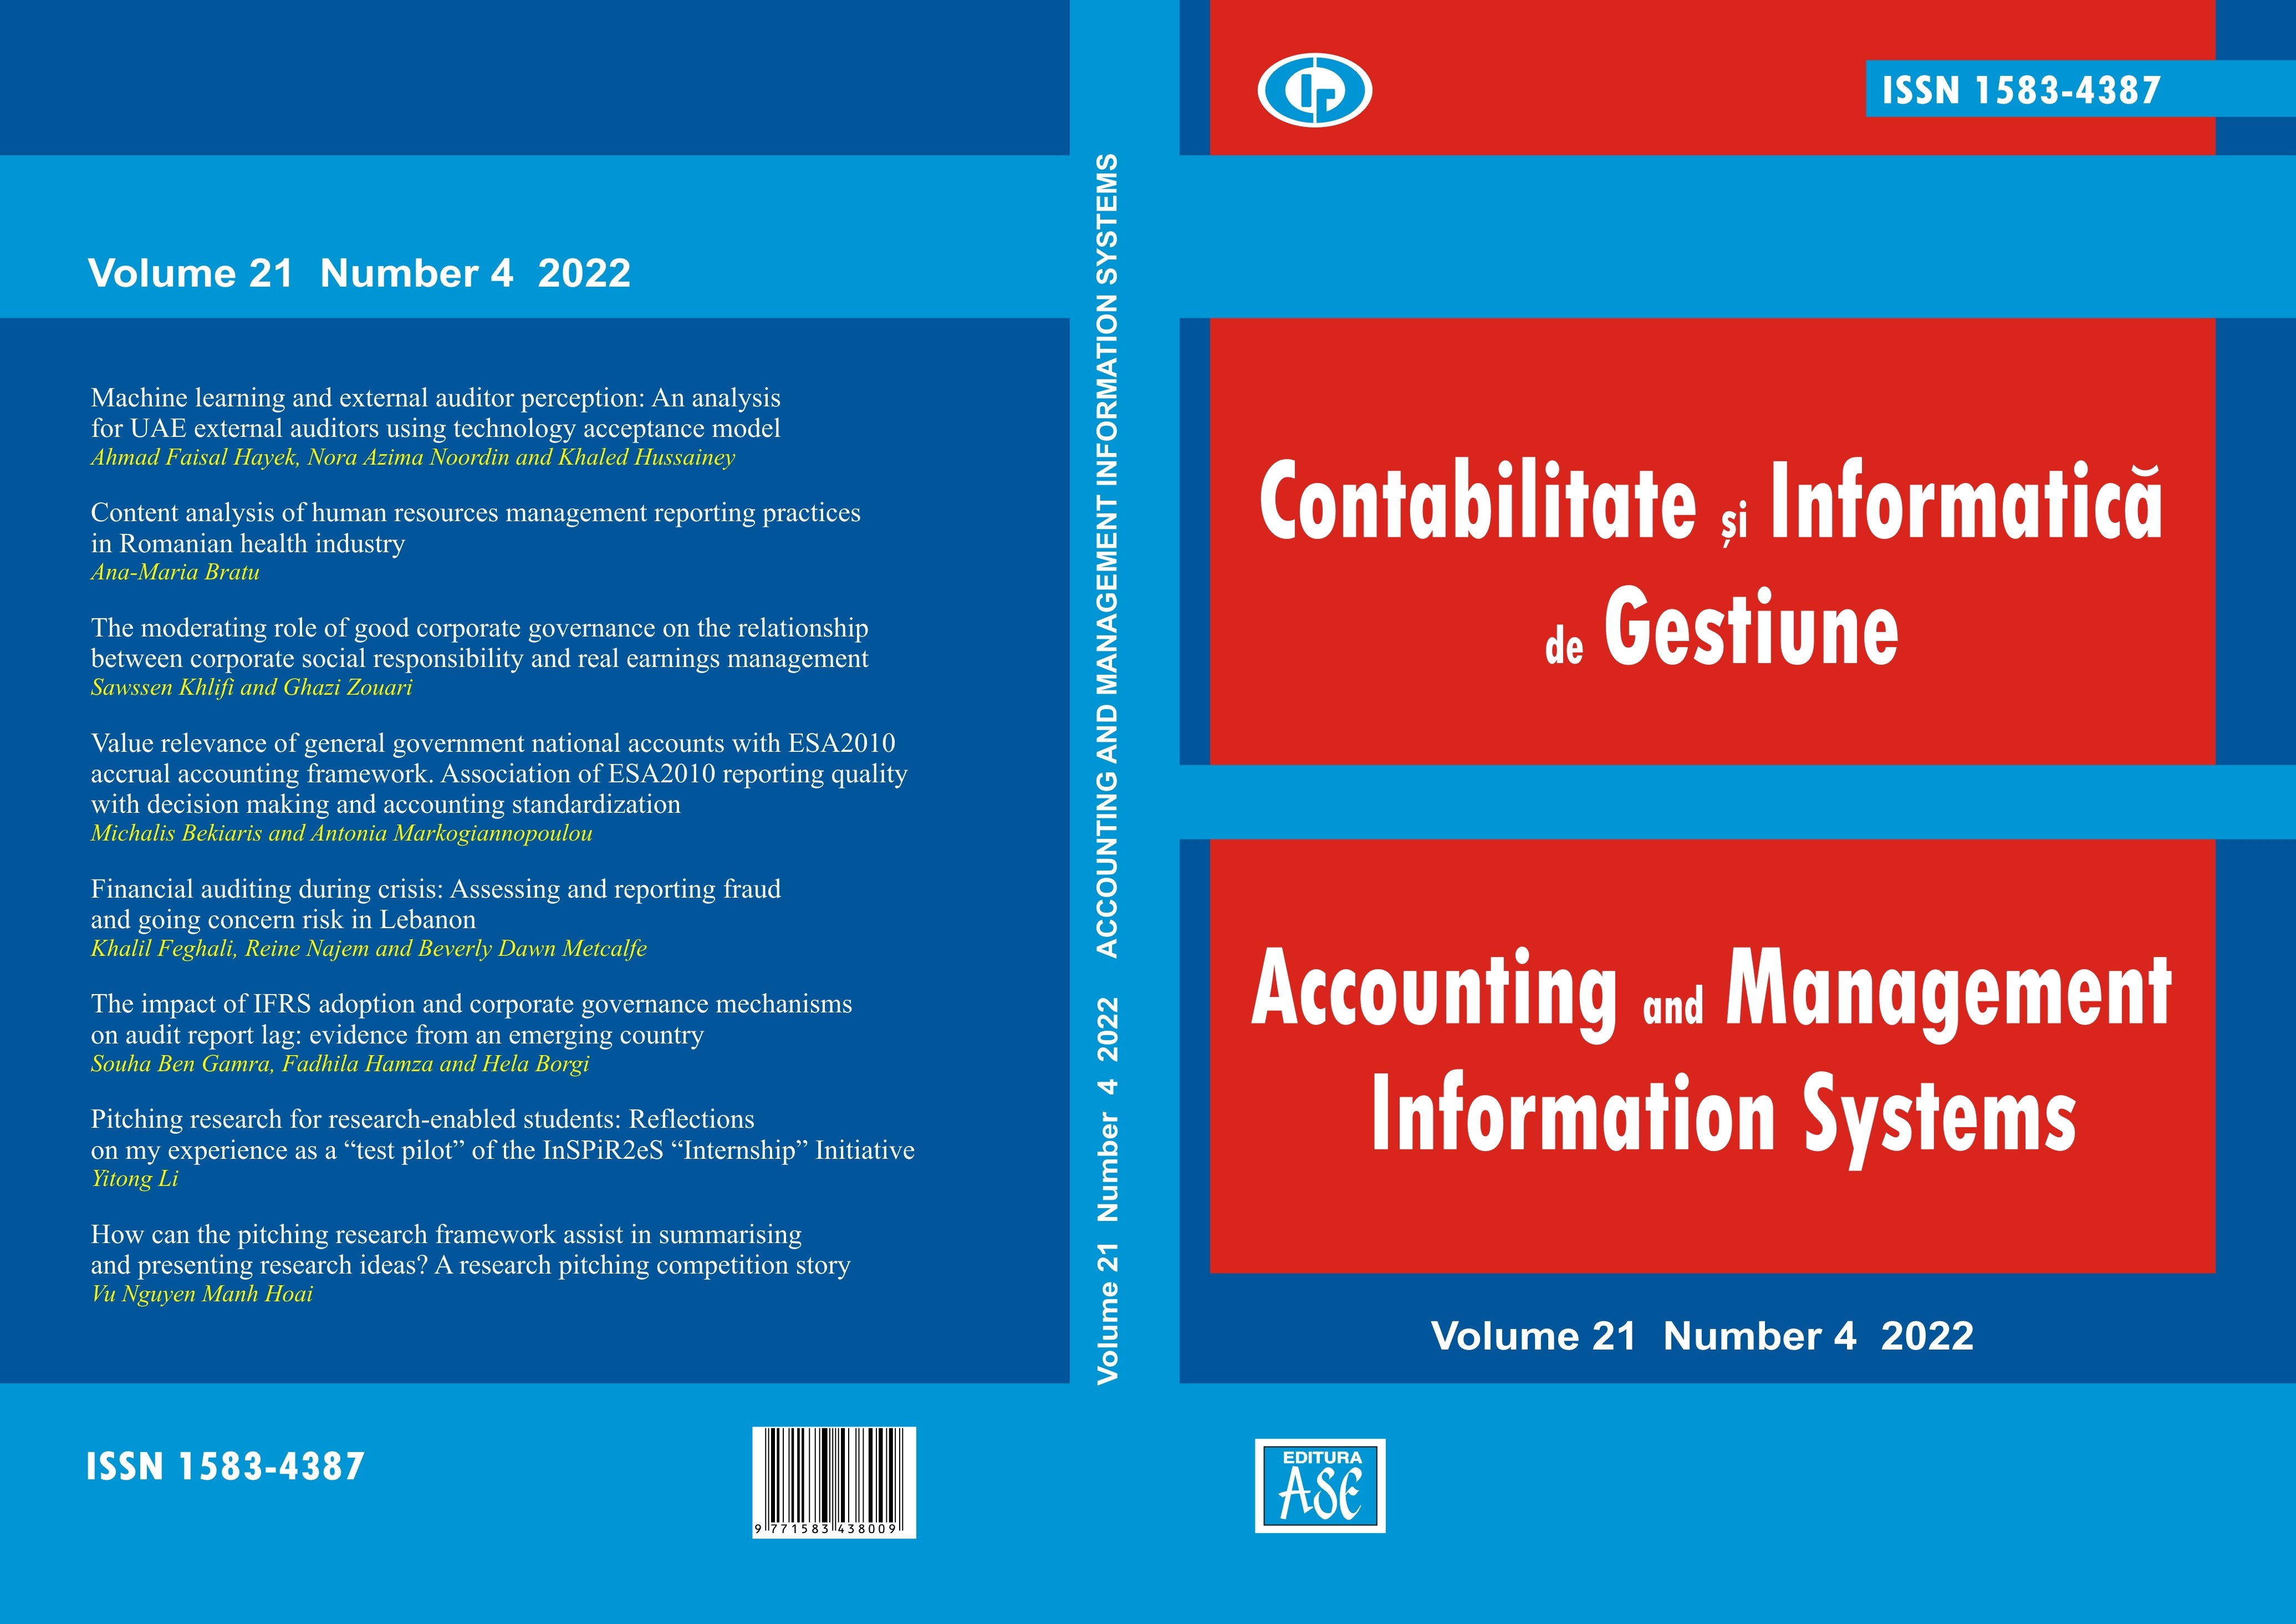 Value relevance of general government national accounts with ESA2010 accrual accounting framework. Association of ESA2010 reporting quality with decision making and accounting standardisation Cover Image